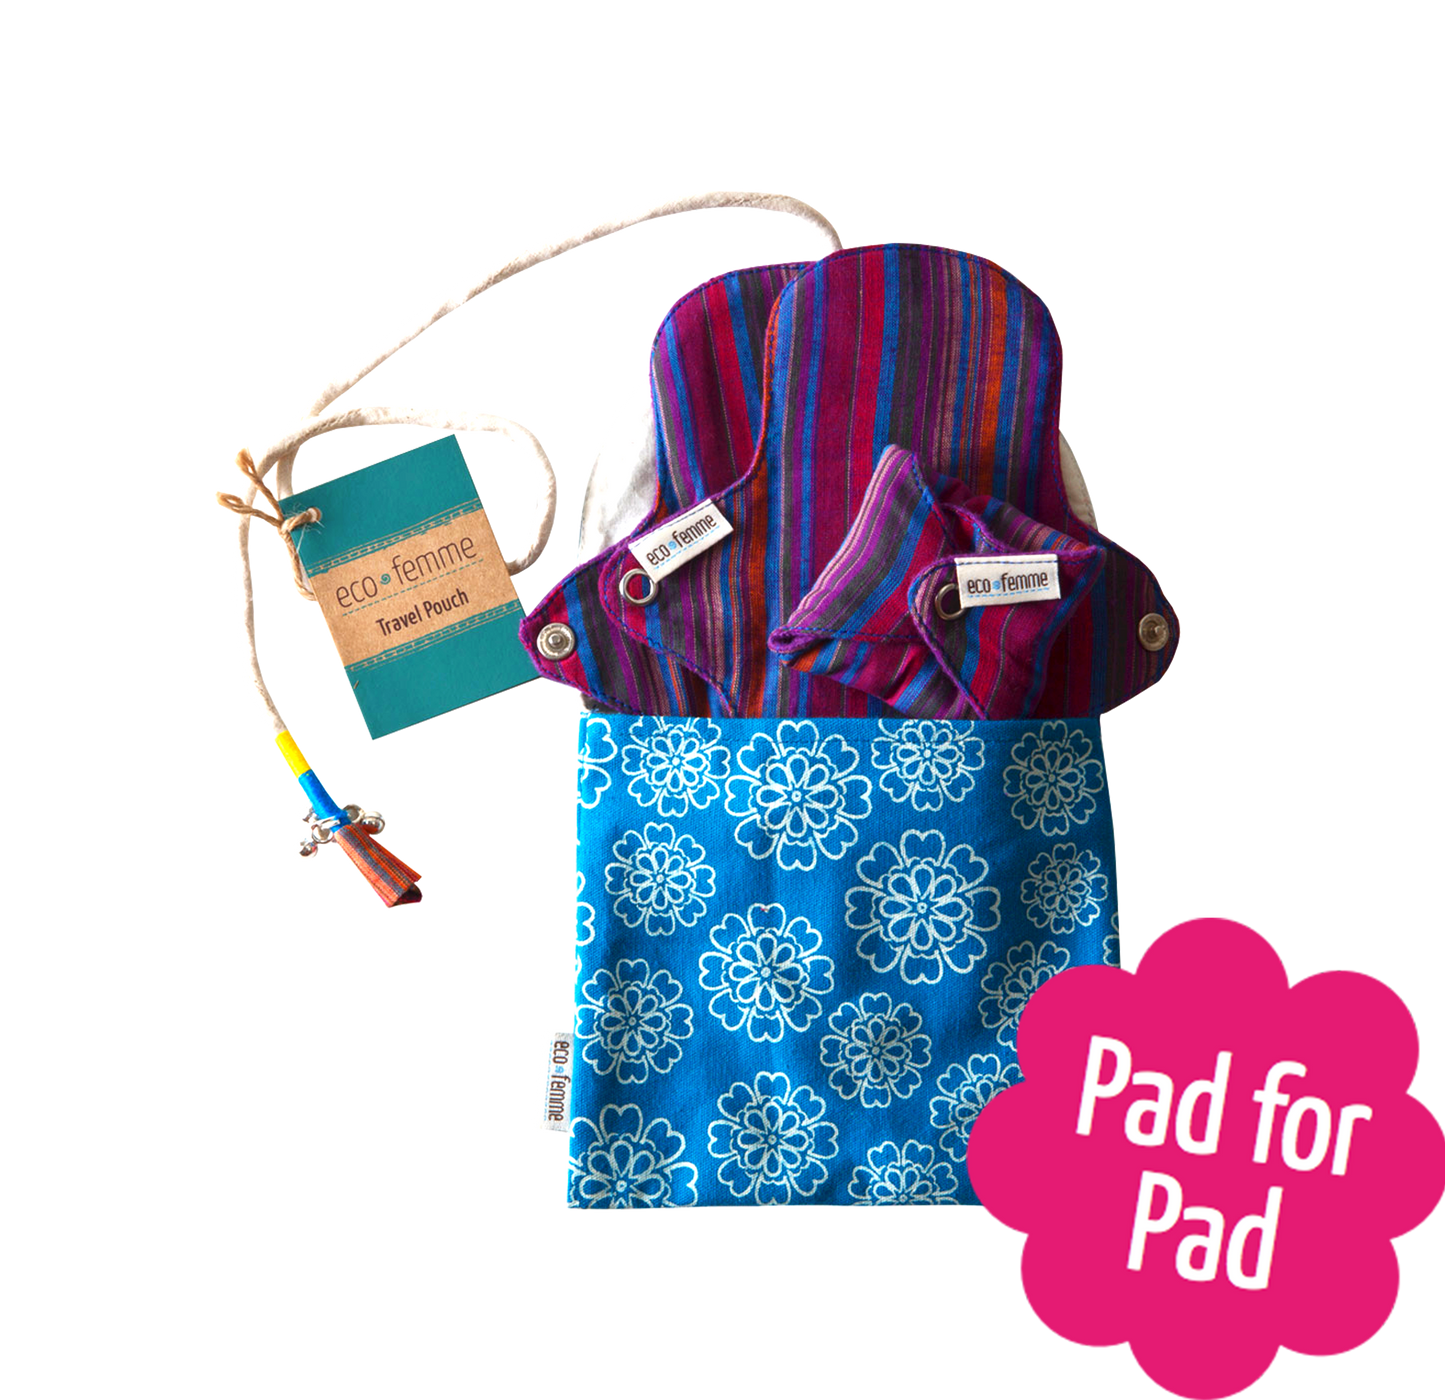 Carry Pouch for Cloth Sanitary Pads - Eco-friendly and washable pouch for discreet storage of csp's